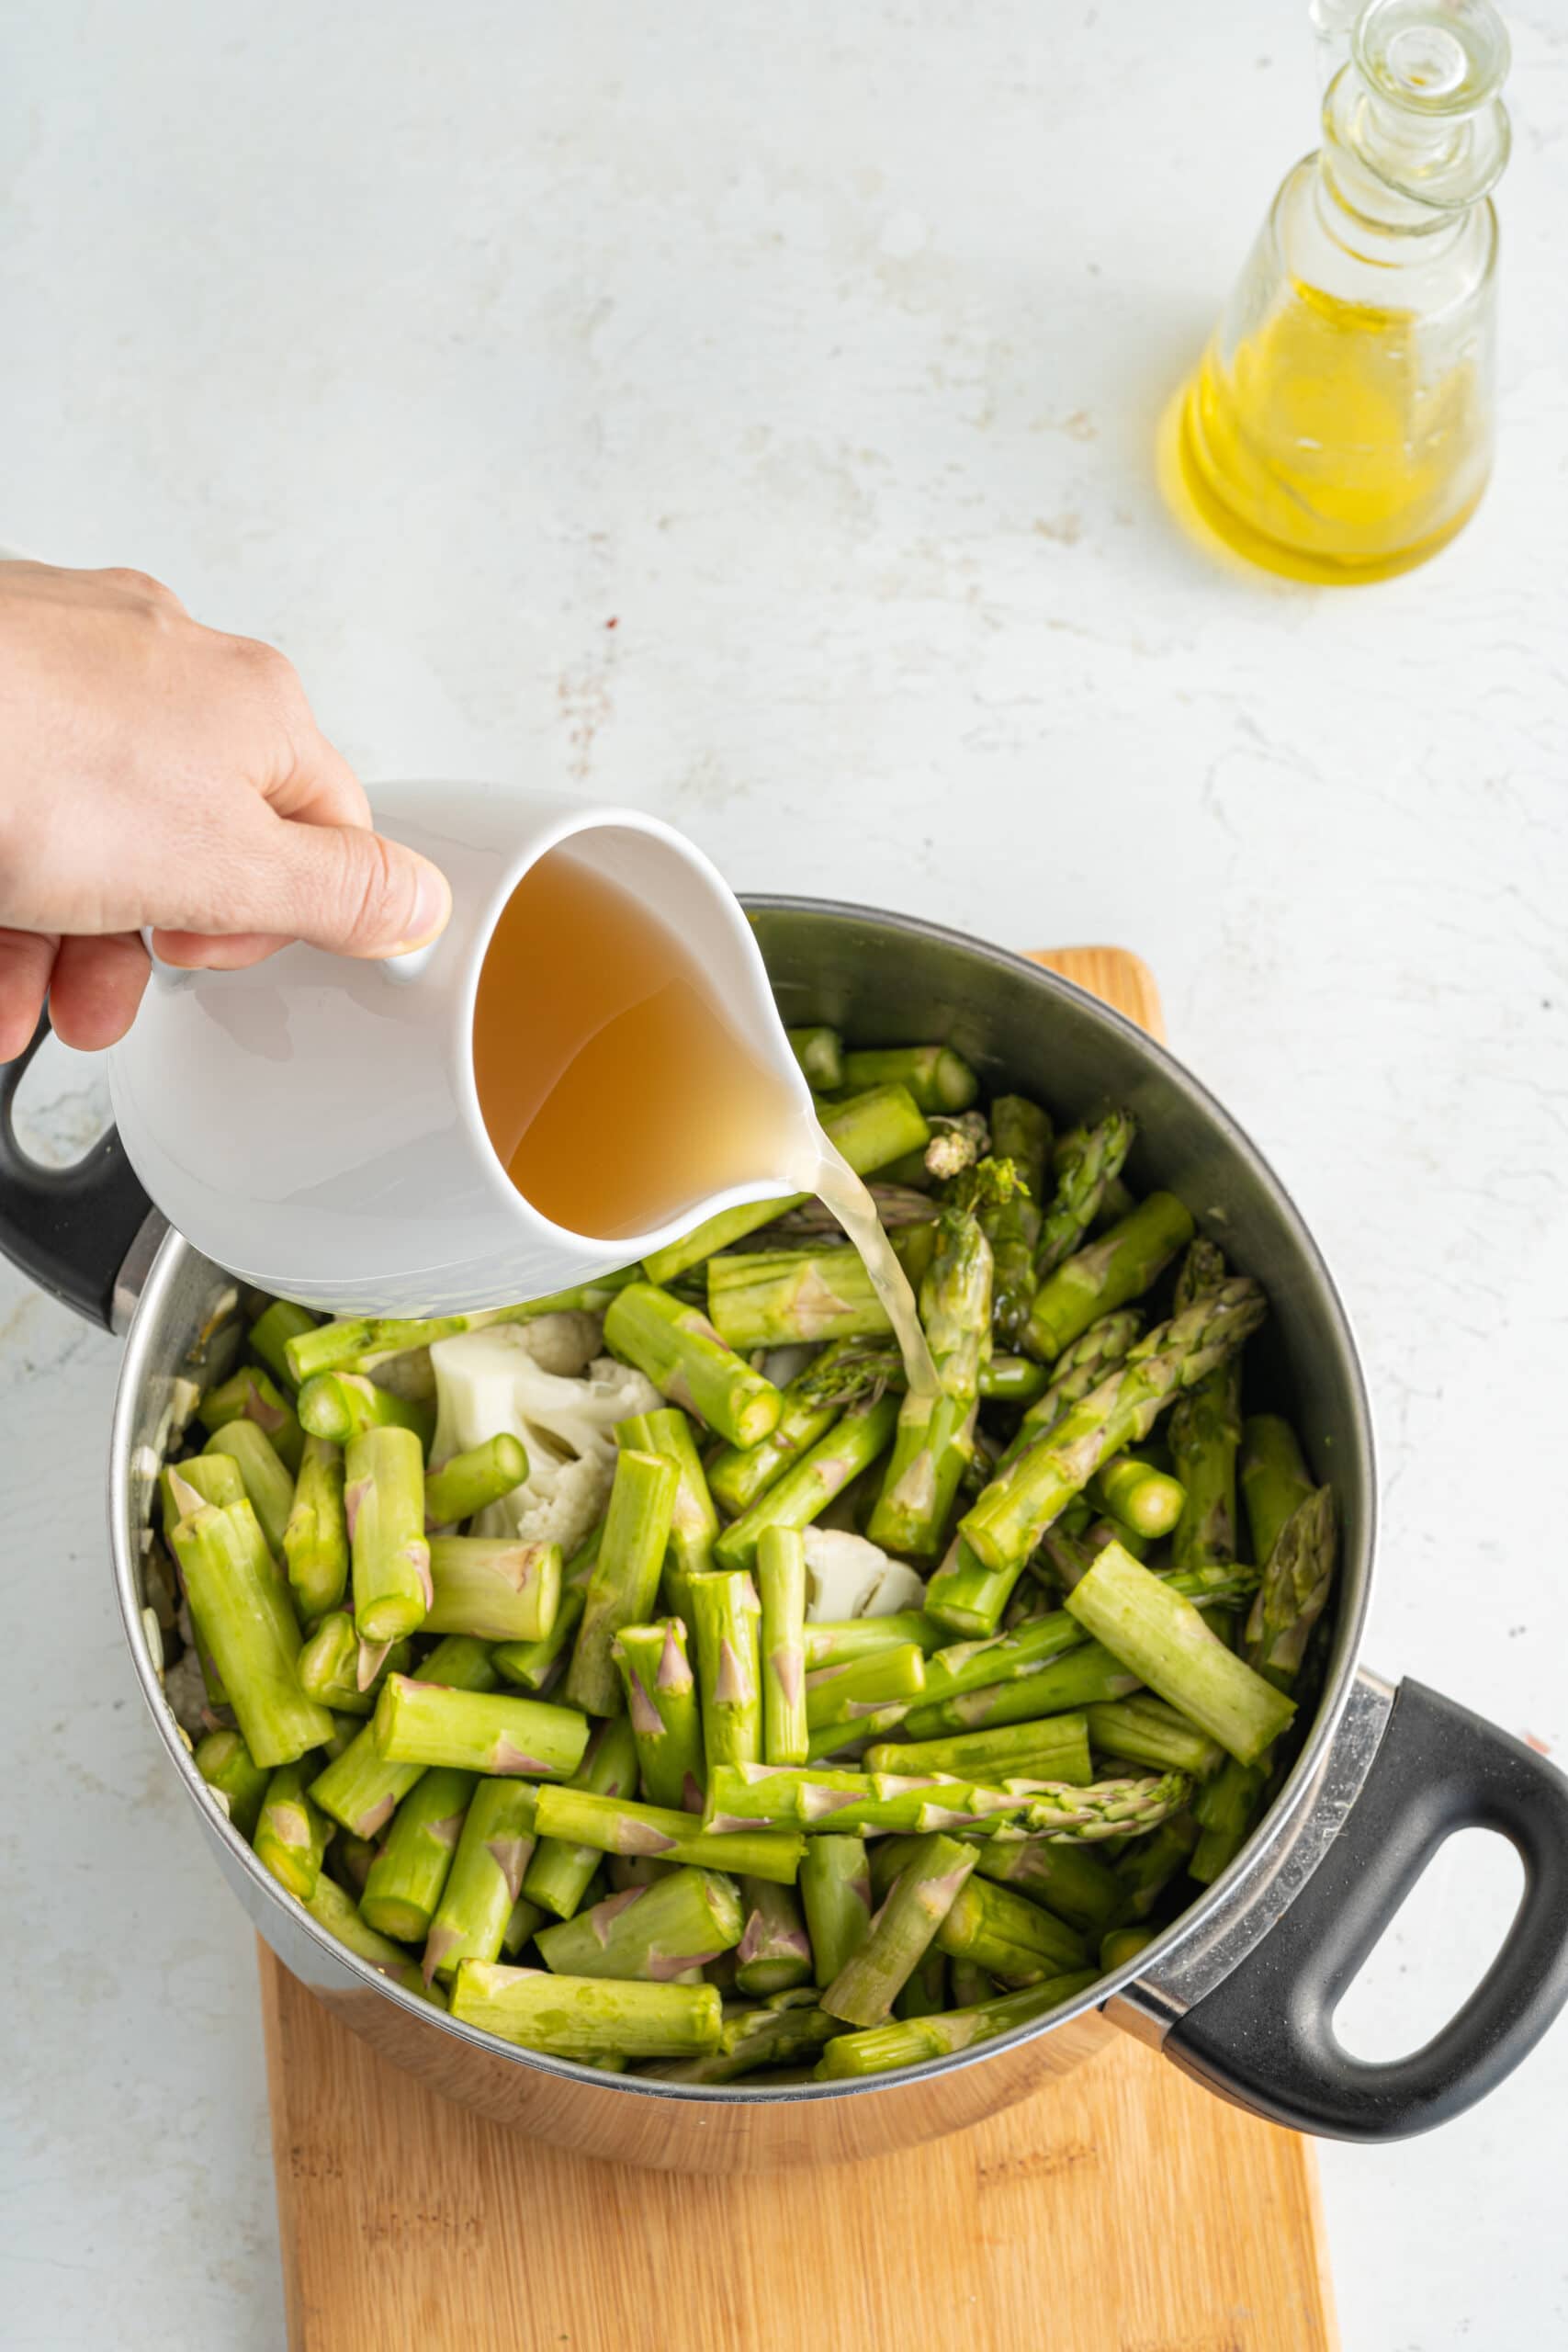 Chopped asparagus in a skillet with a white pitcher of broth about to be poured in the skillet.